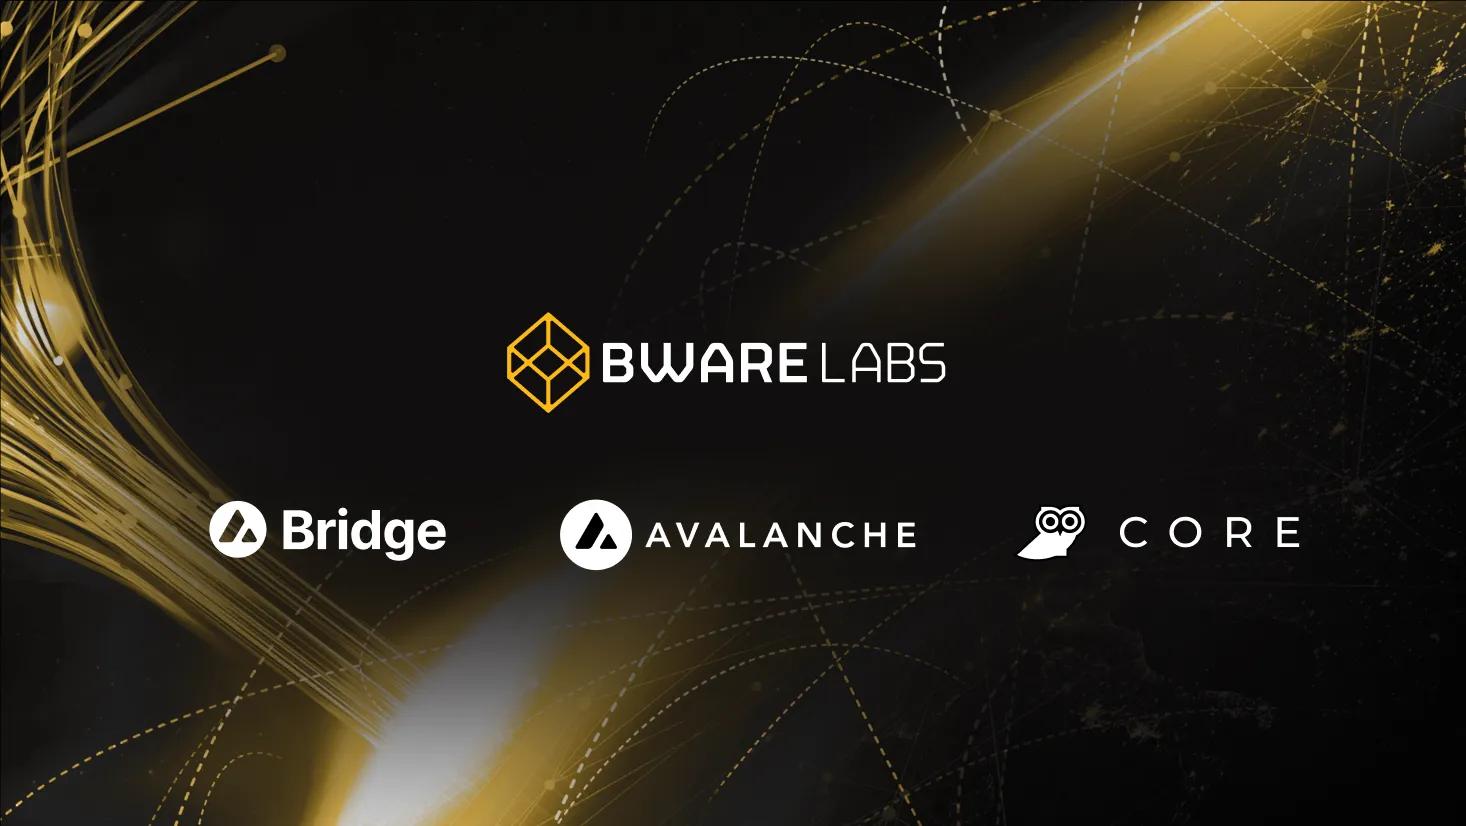 The Bware Labs $INFRA token will be available on the Avalanche Bridge as INFRA.e